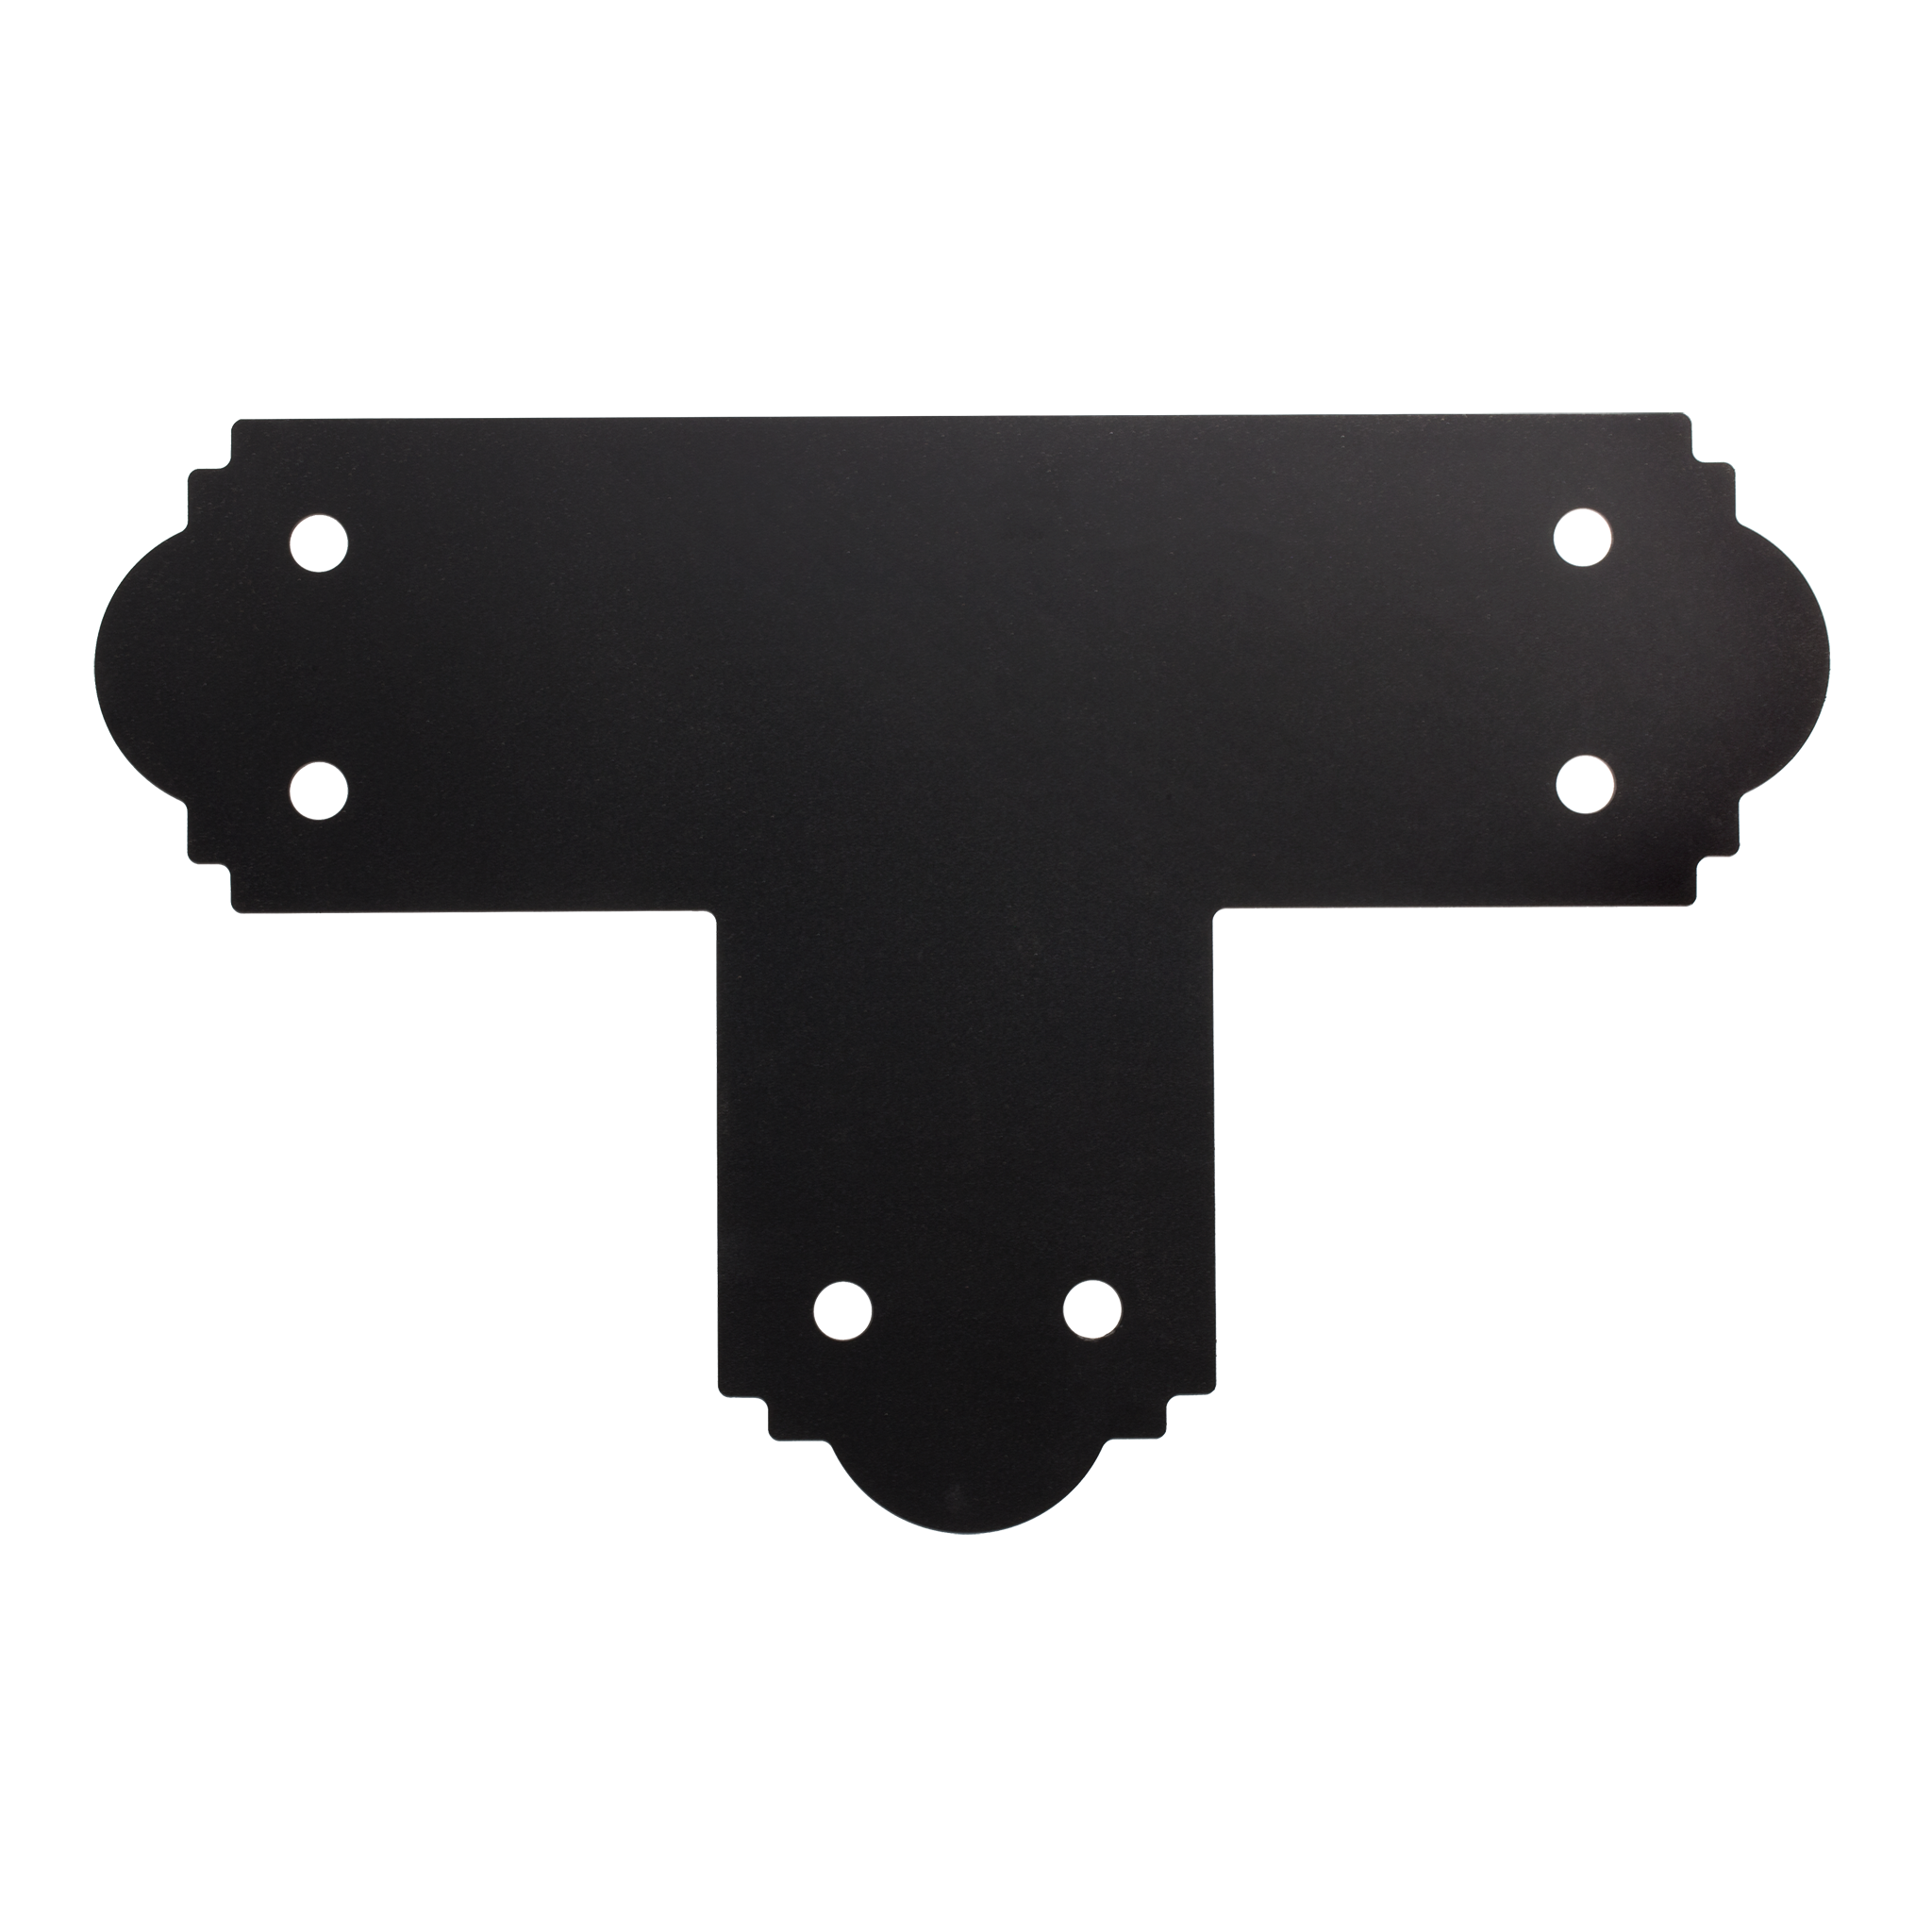 Outdoor Accents® T Strap for 6x6, ZMAX® Black Powder-Coated